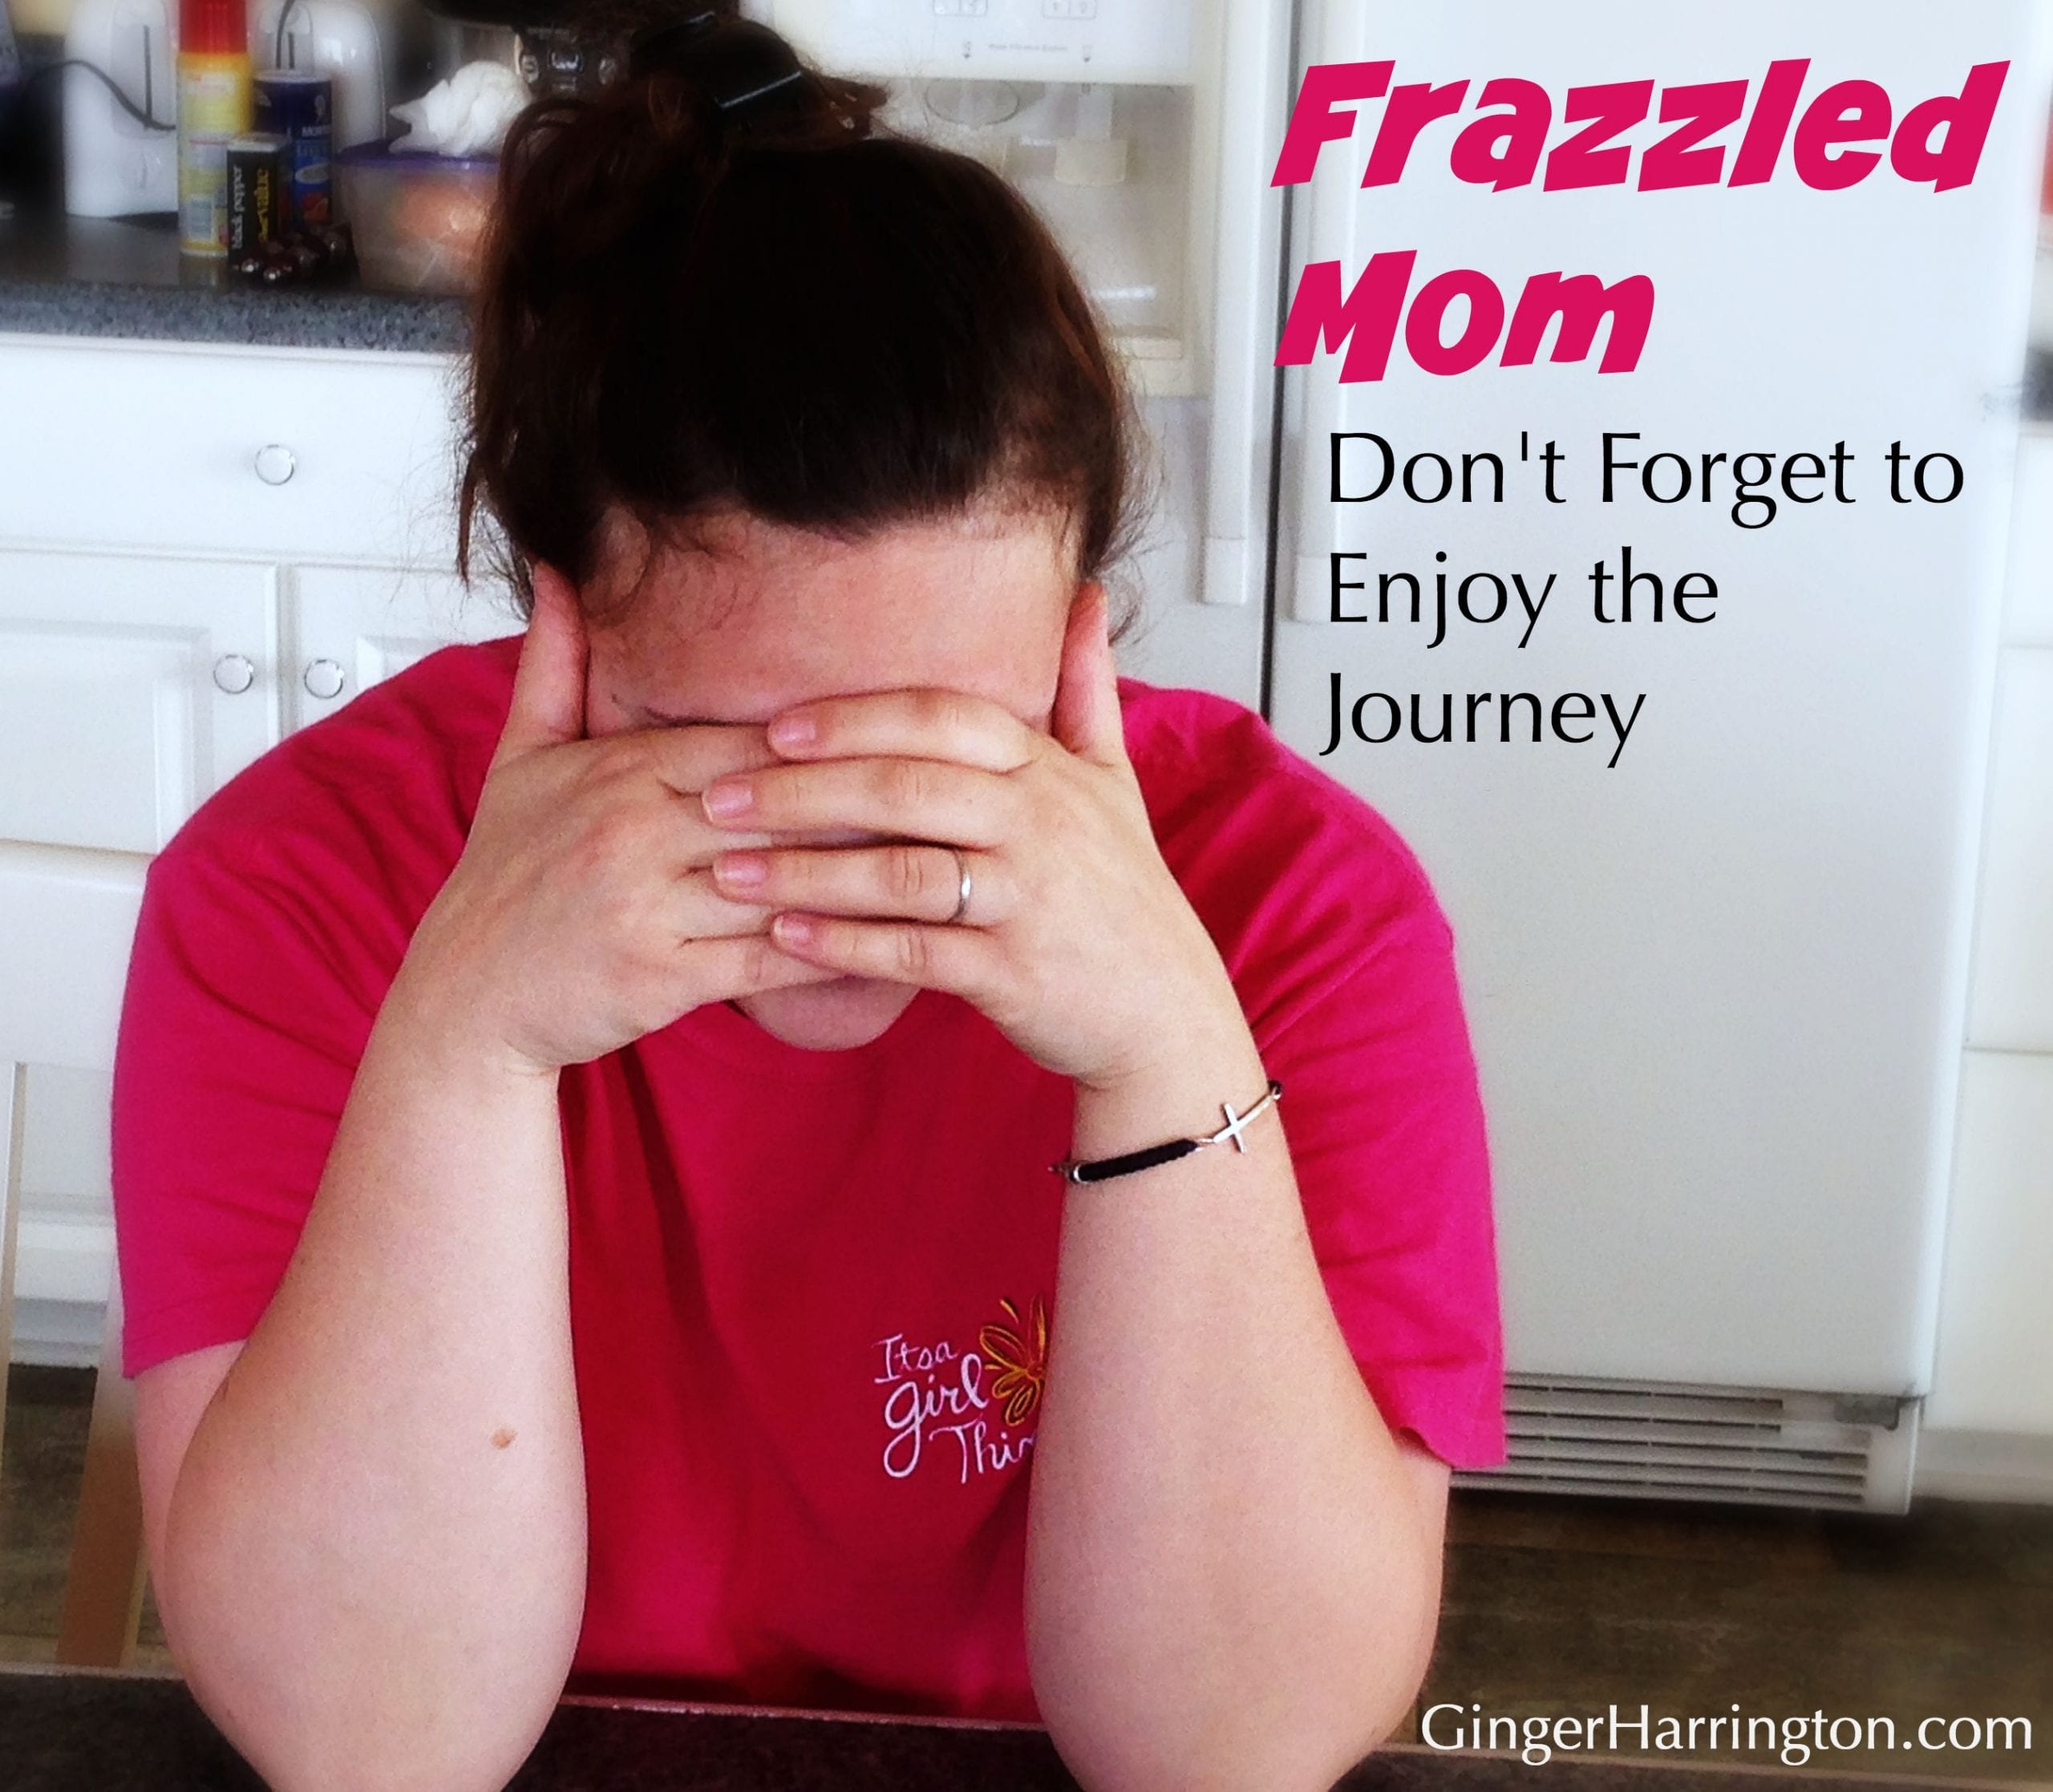 Frazzled Mom, Don’t Forget to Enjoy the Journey